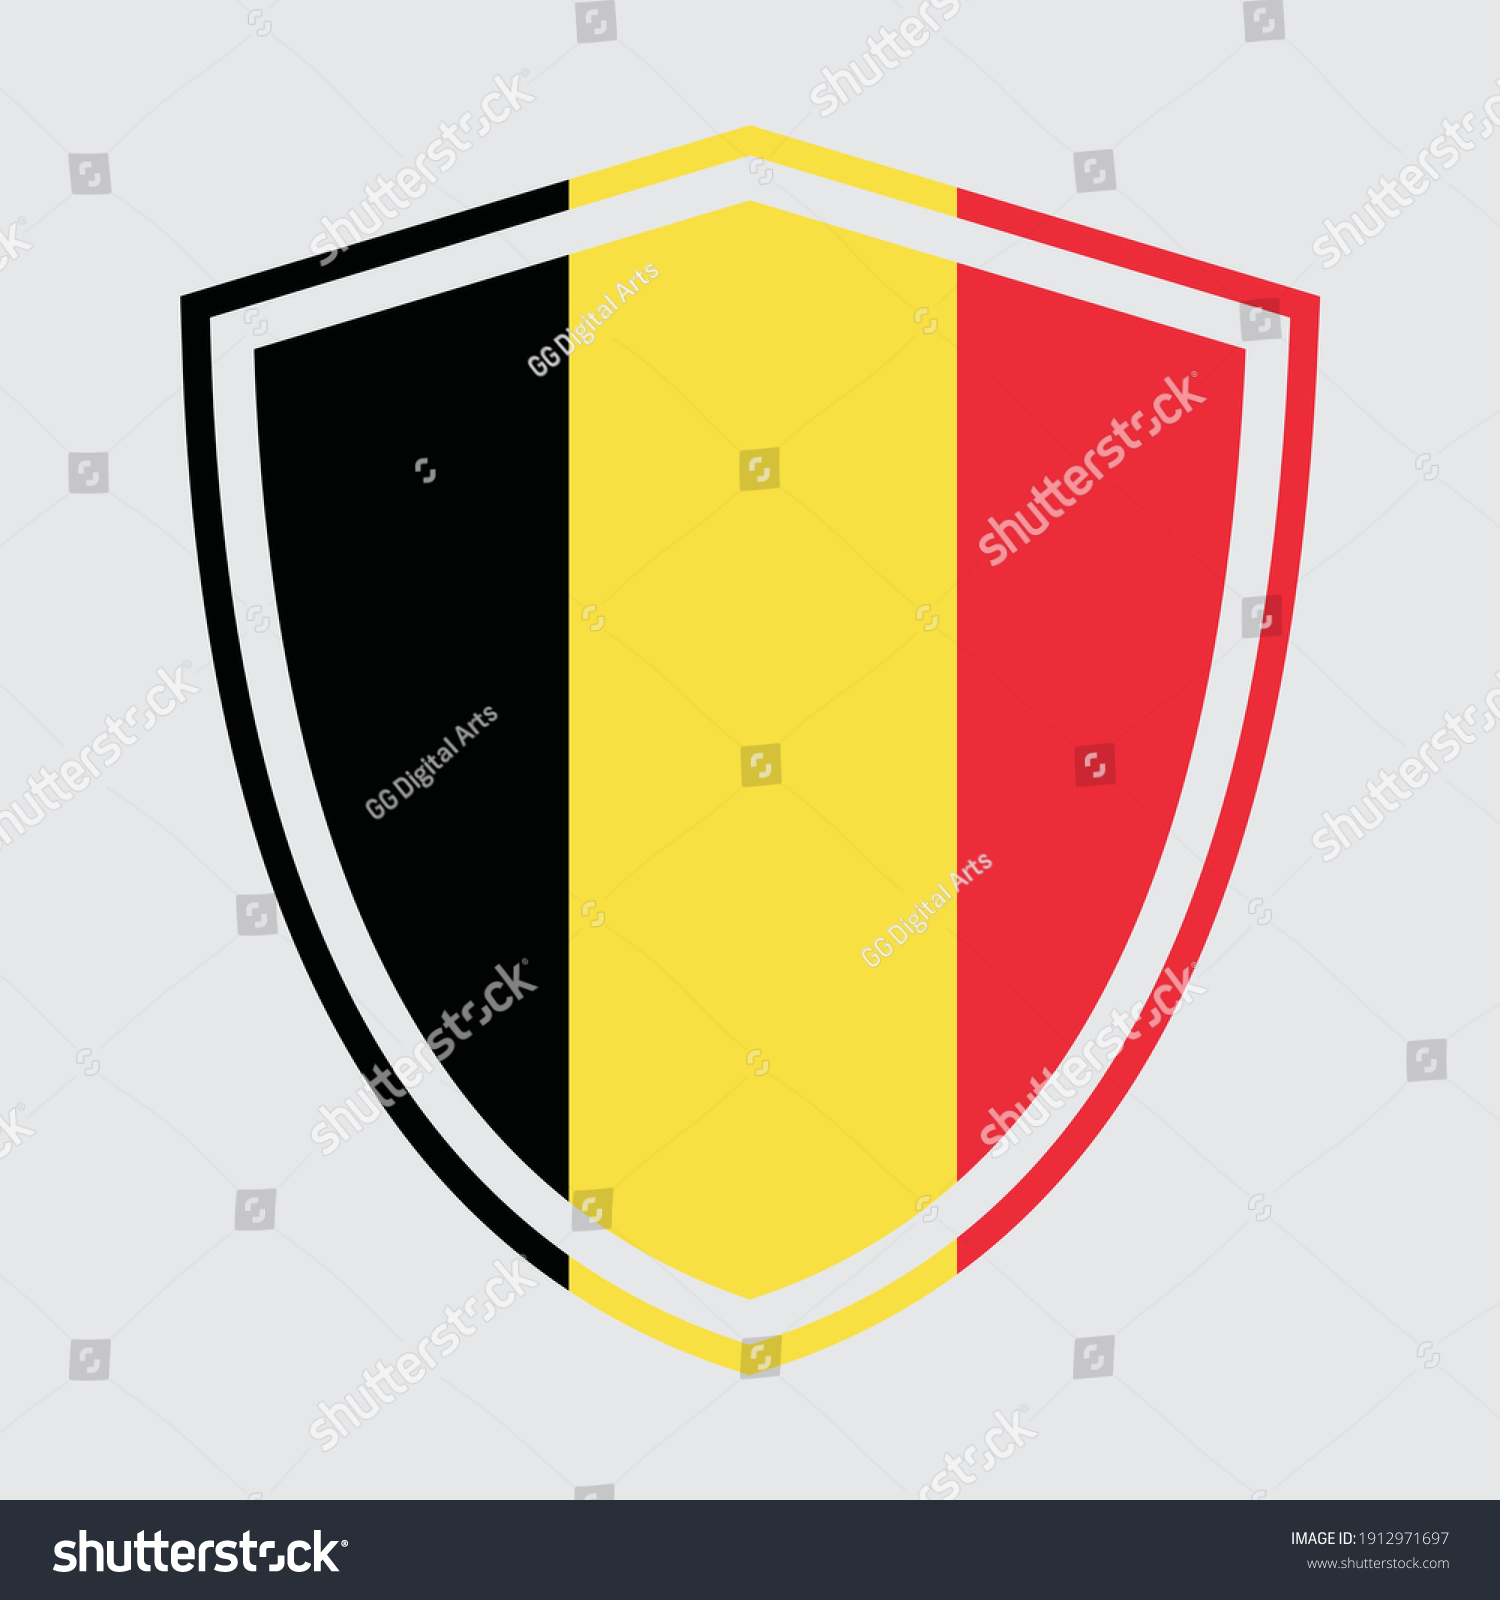 SVG of Vector image of a shield with Belgian flag. svg